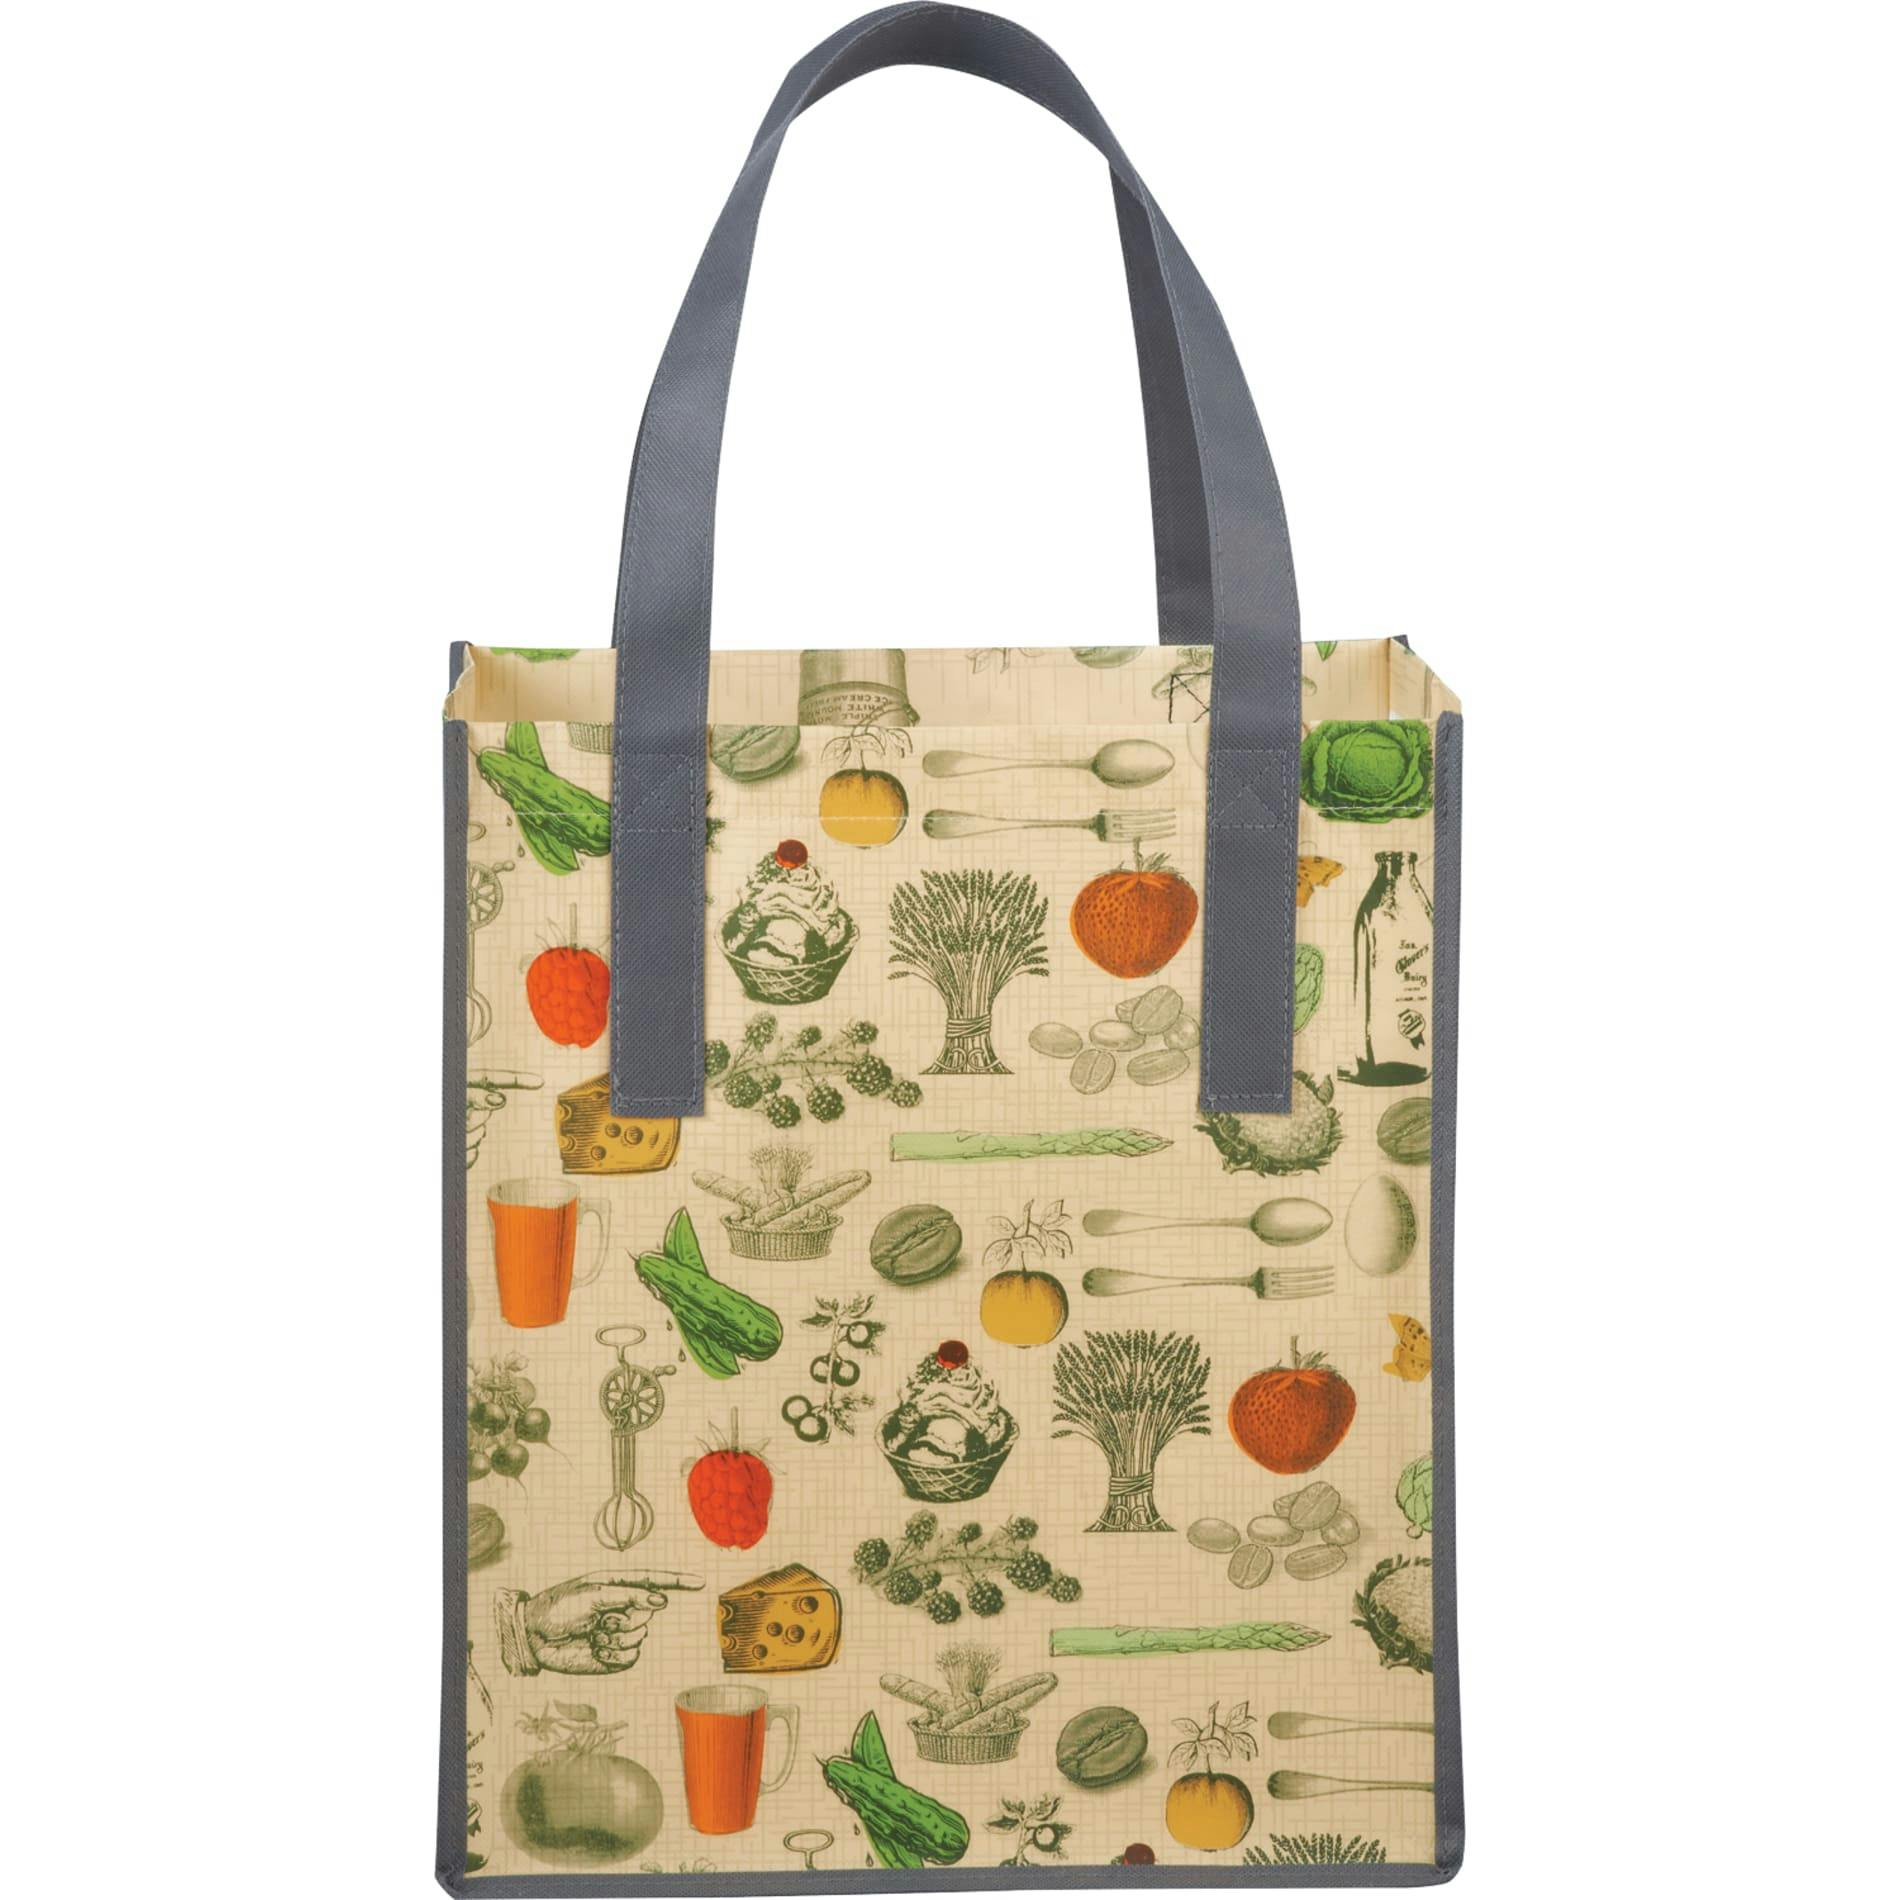 Big Grocery Vintage Laminated Non-Woven Tote - additional Image 1